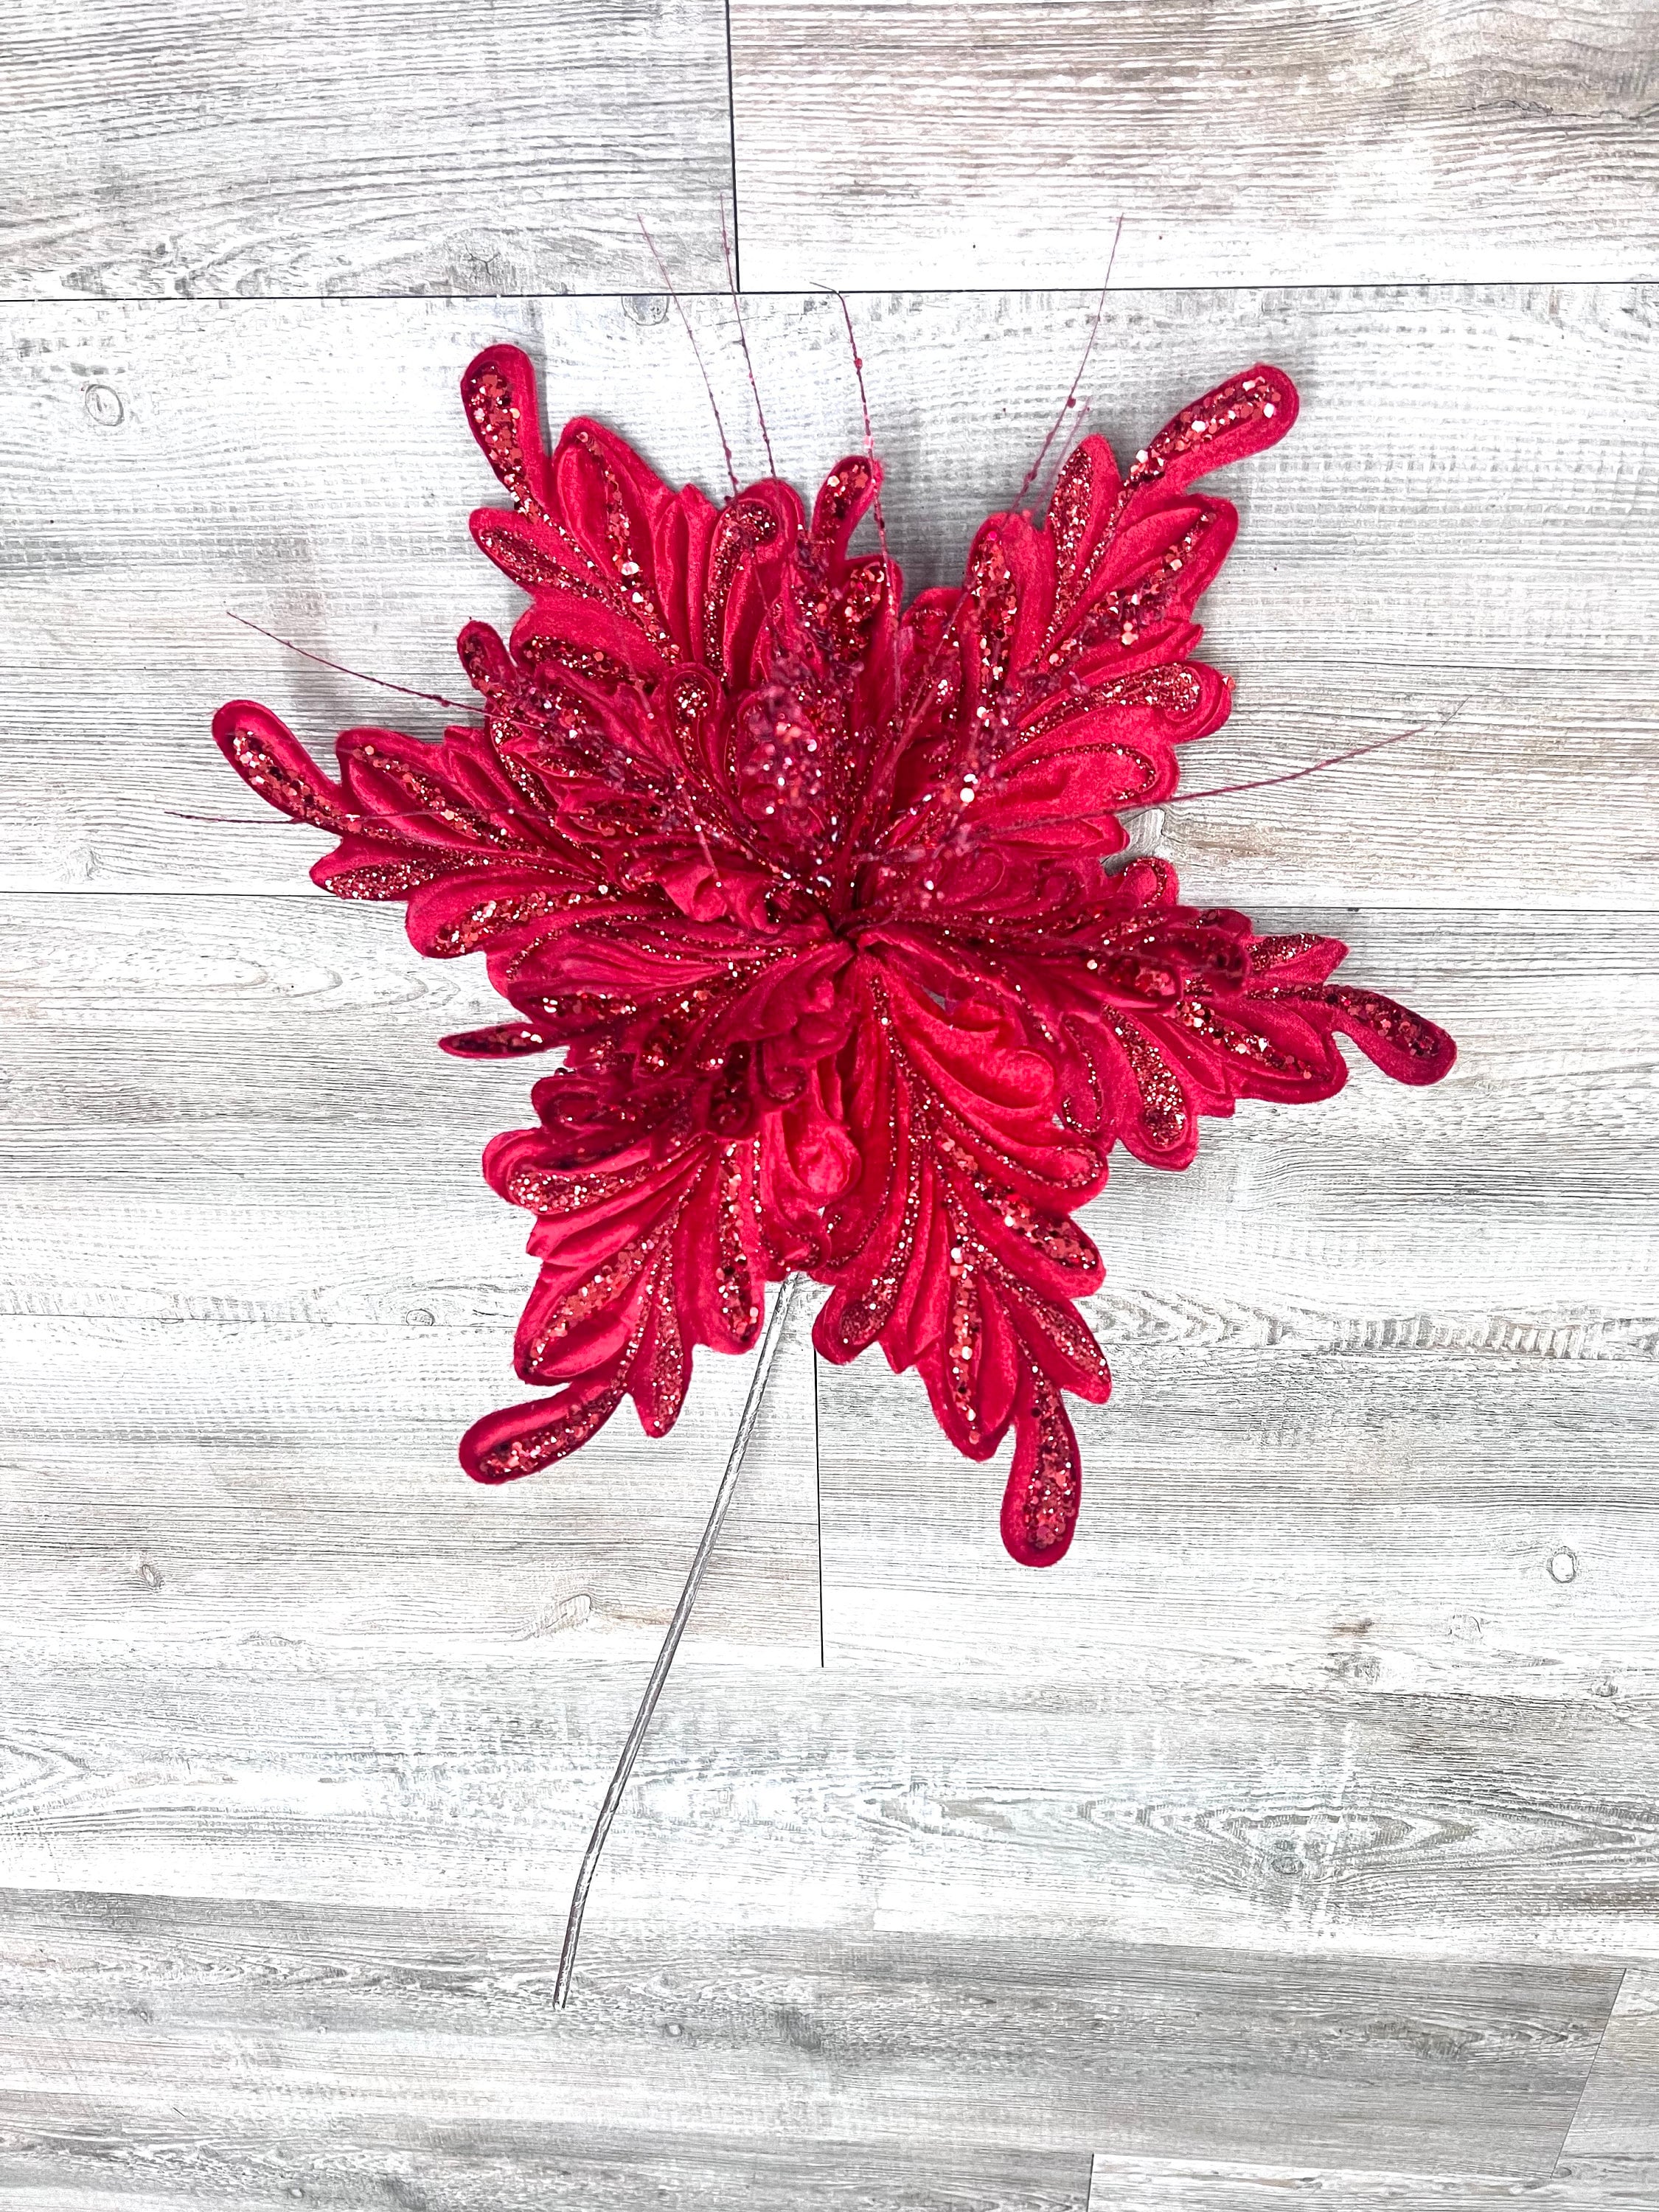 Red Fancy Floral Stem, Red Poinsettia Stem for Christmas Tree, Red Christmas Tree Decorations, Red Jeweled Poinsettia for Wreaths